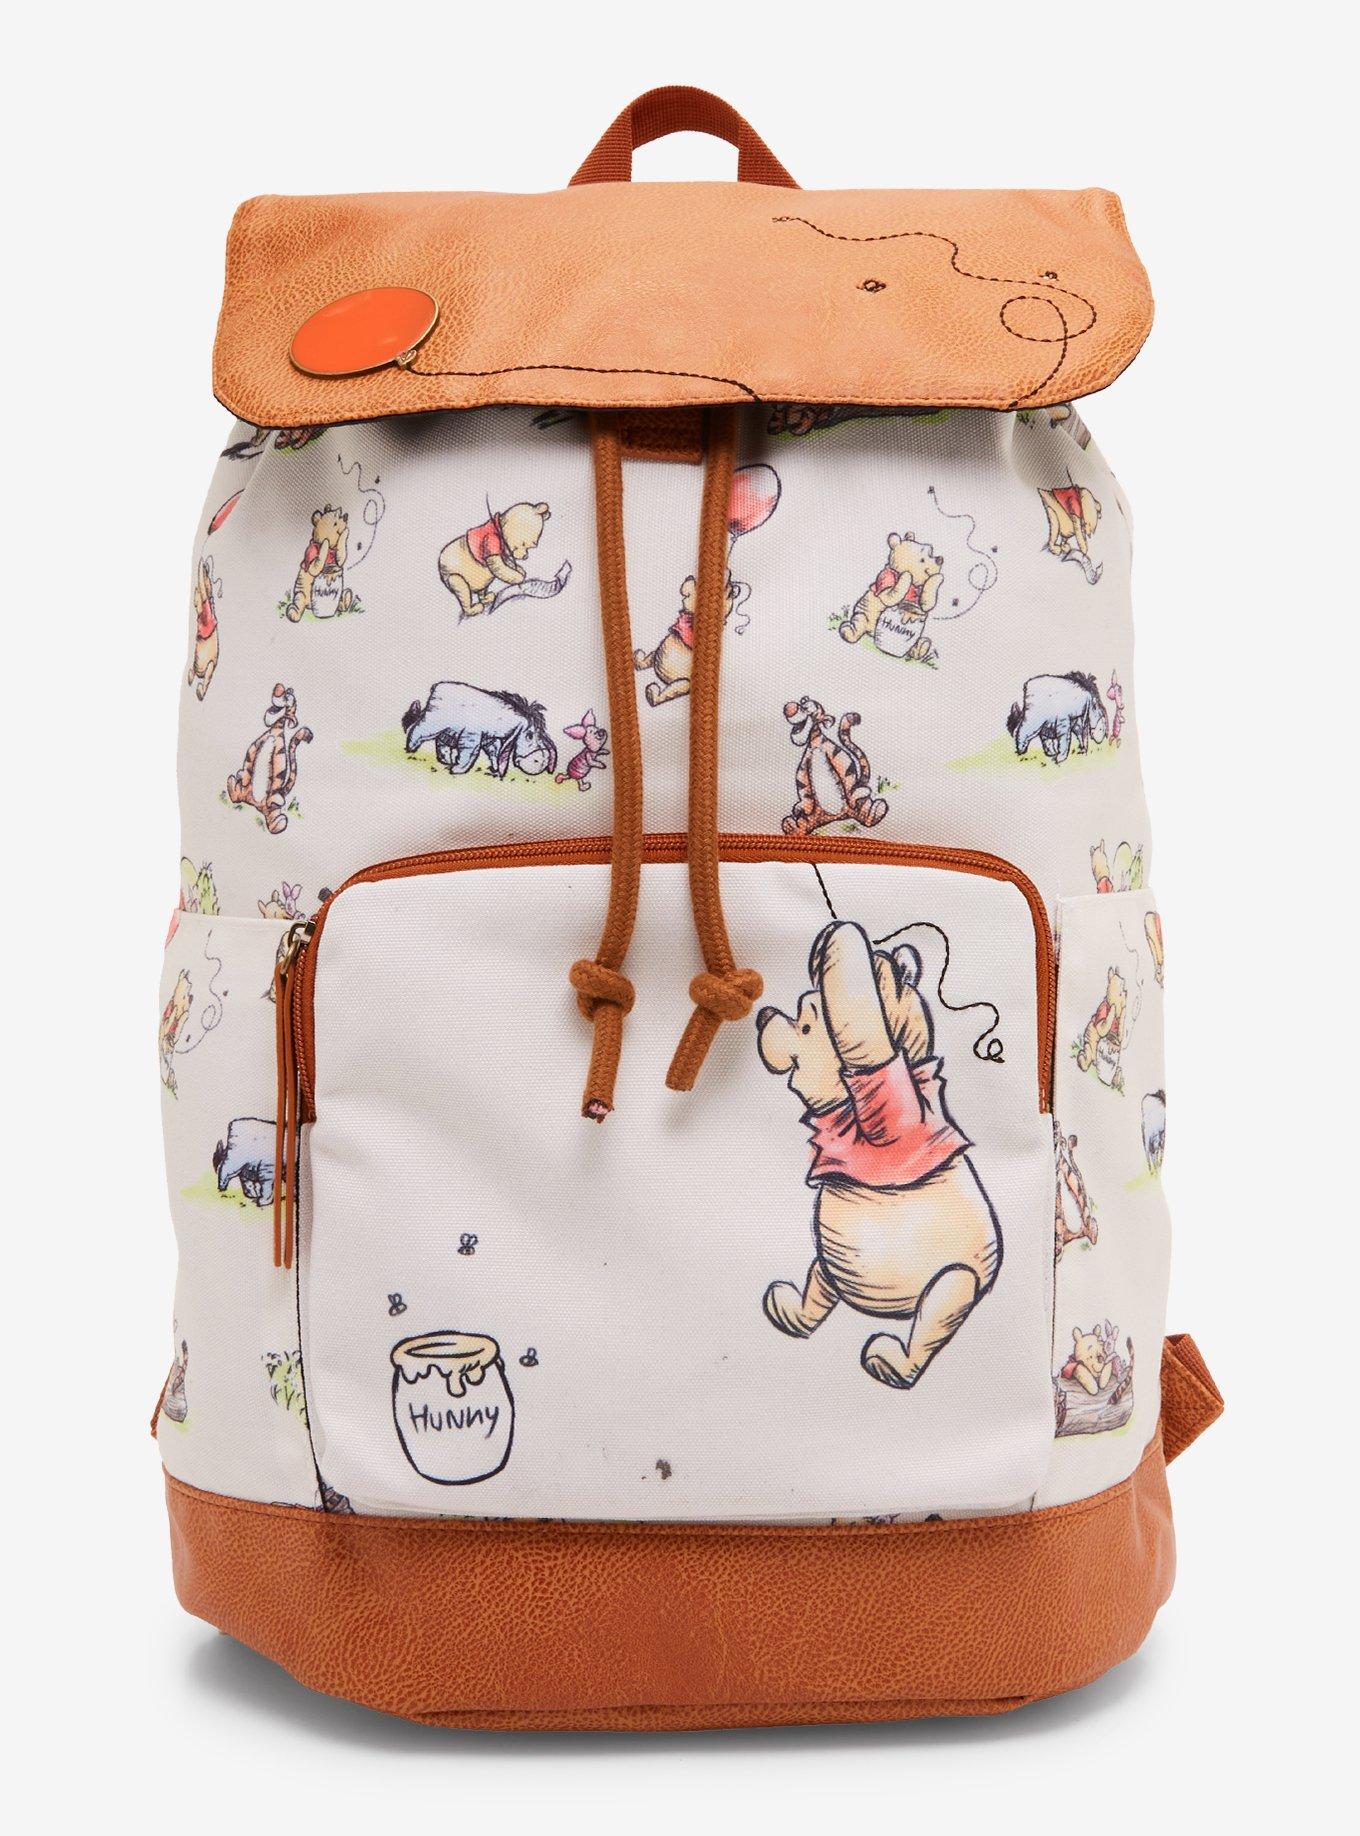 Disney Winnie The Pooh Balloon Slouch Backpack, , hi-res